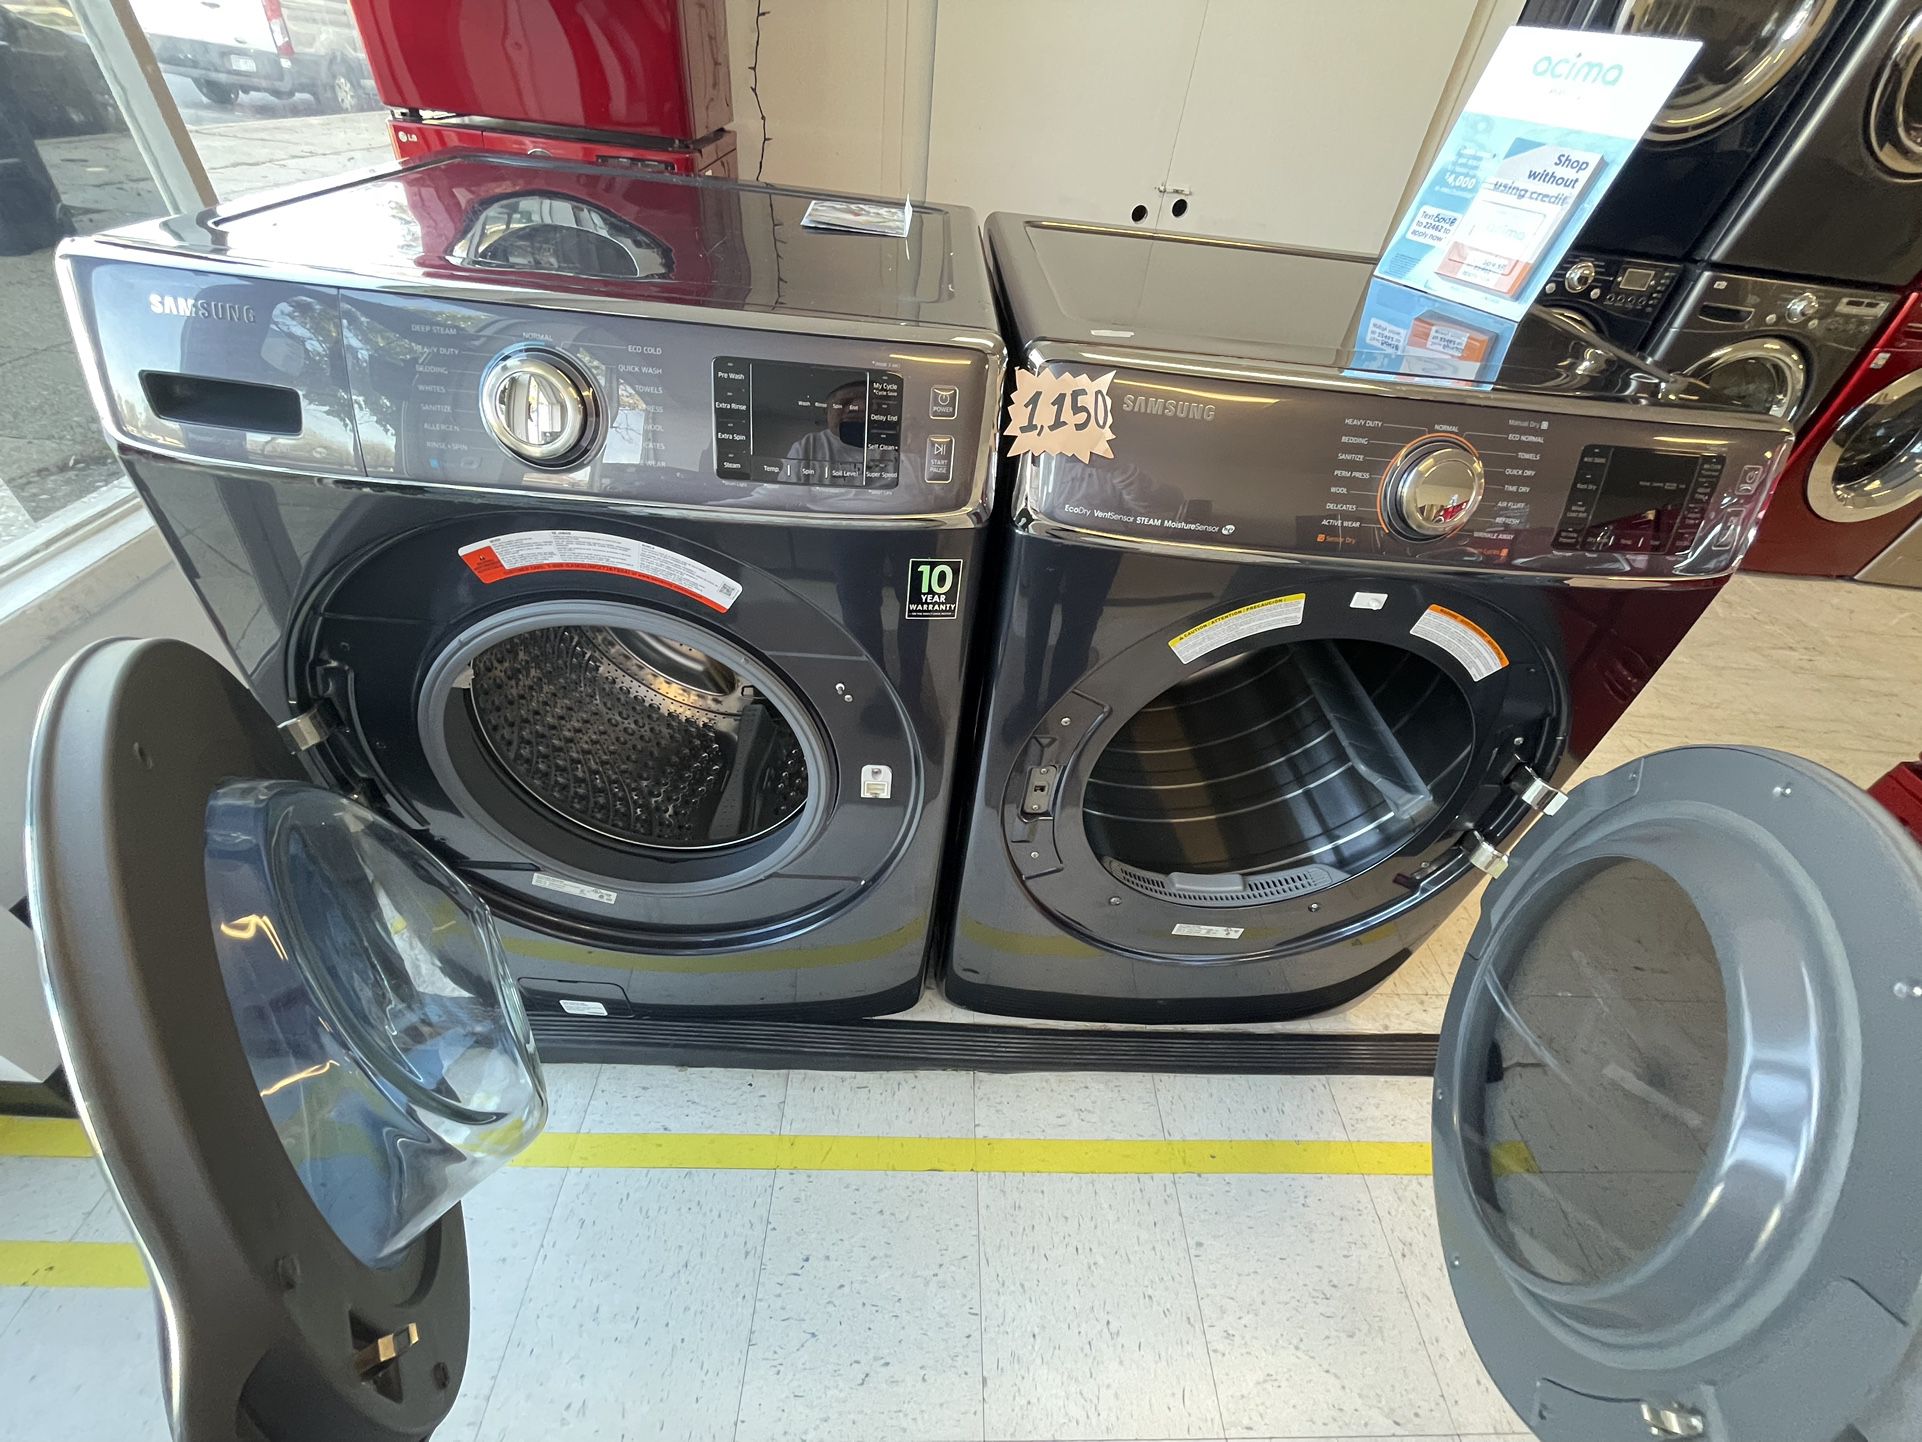 Samsung 30in Front Load Washer And Electric Dryer Set Used Good Condition With 90days Warranty 